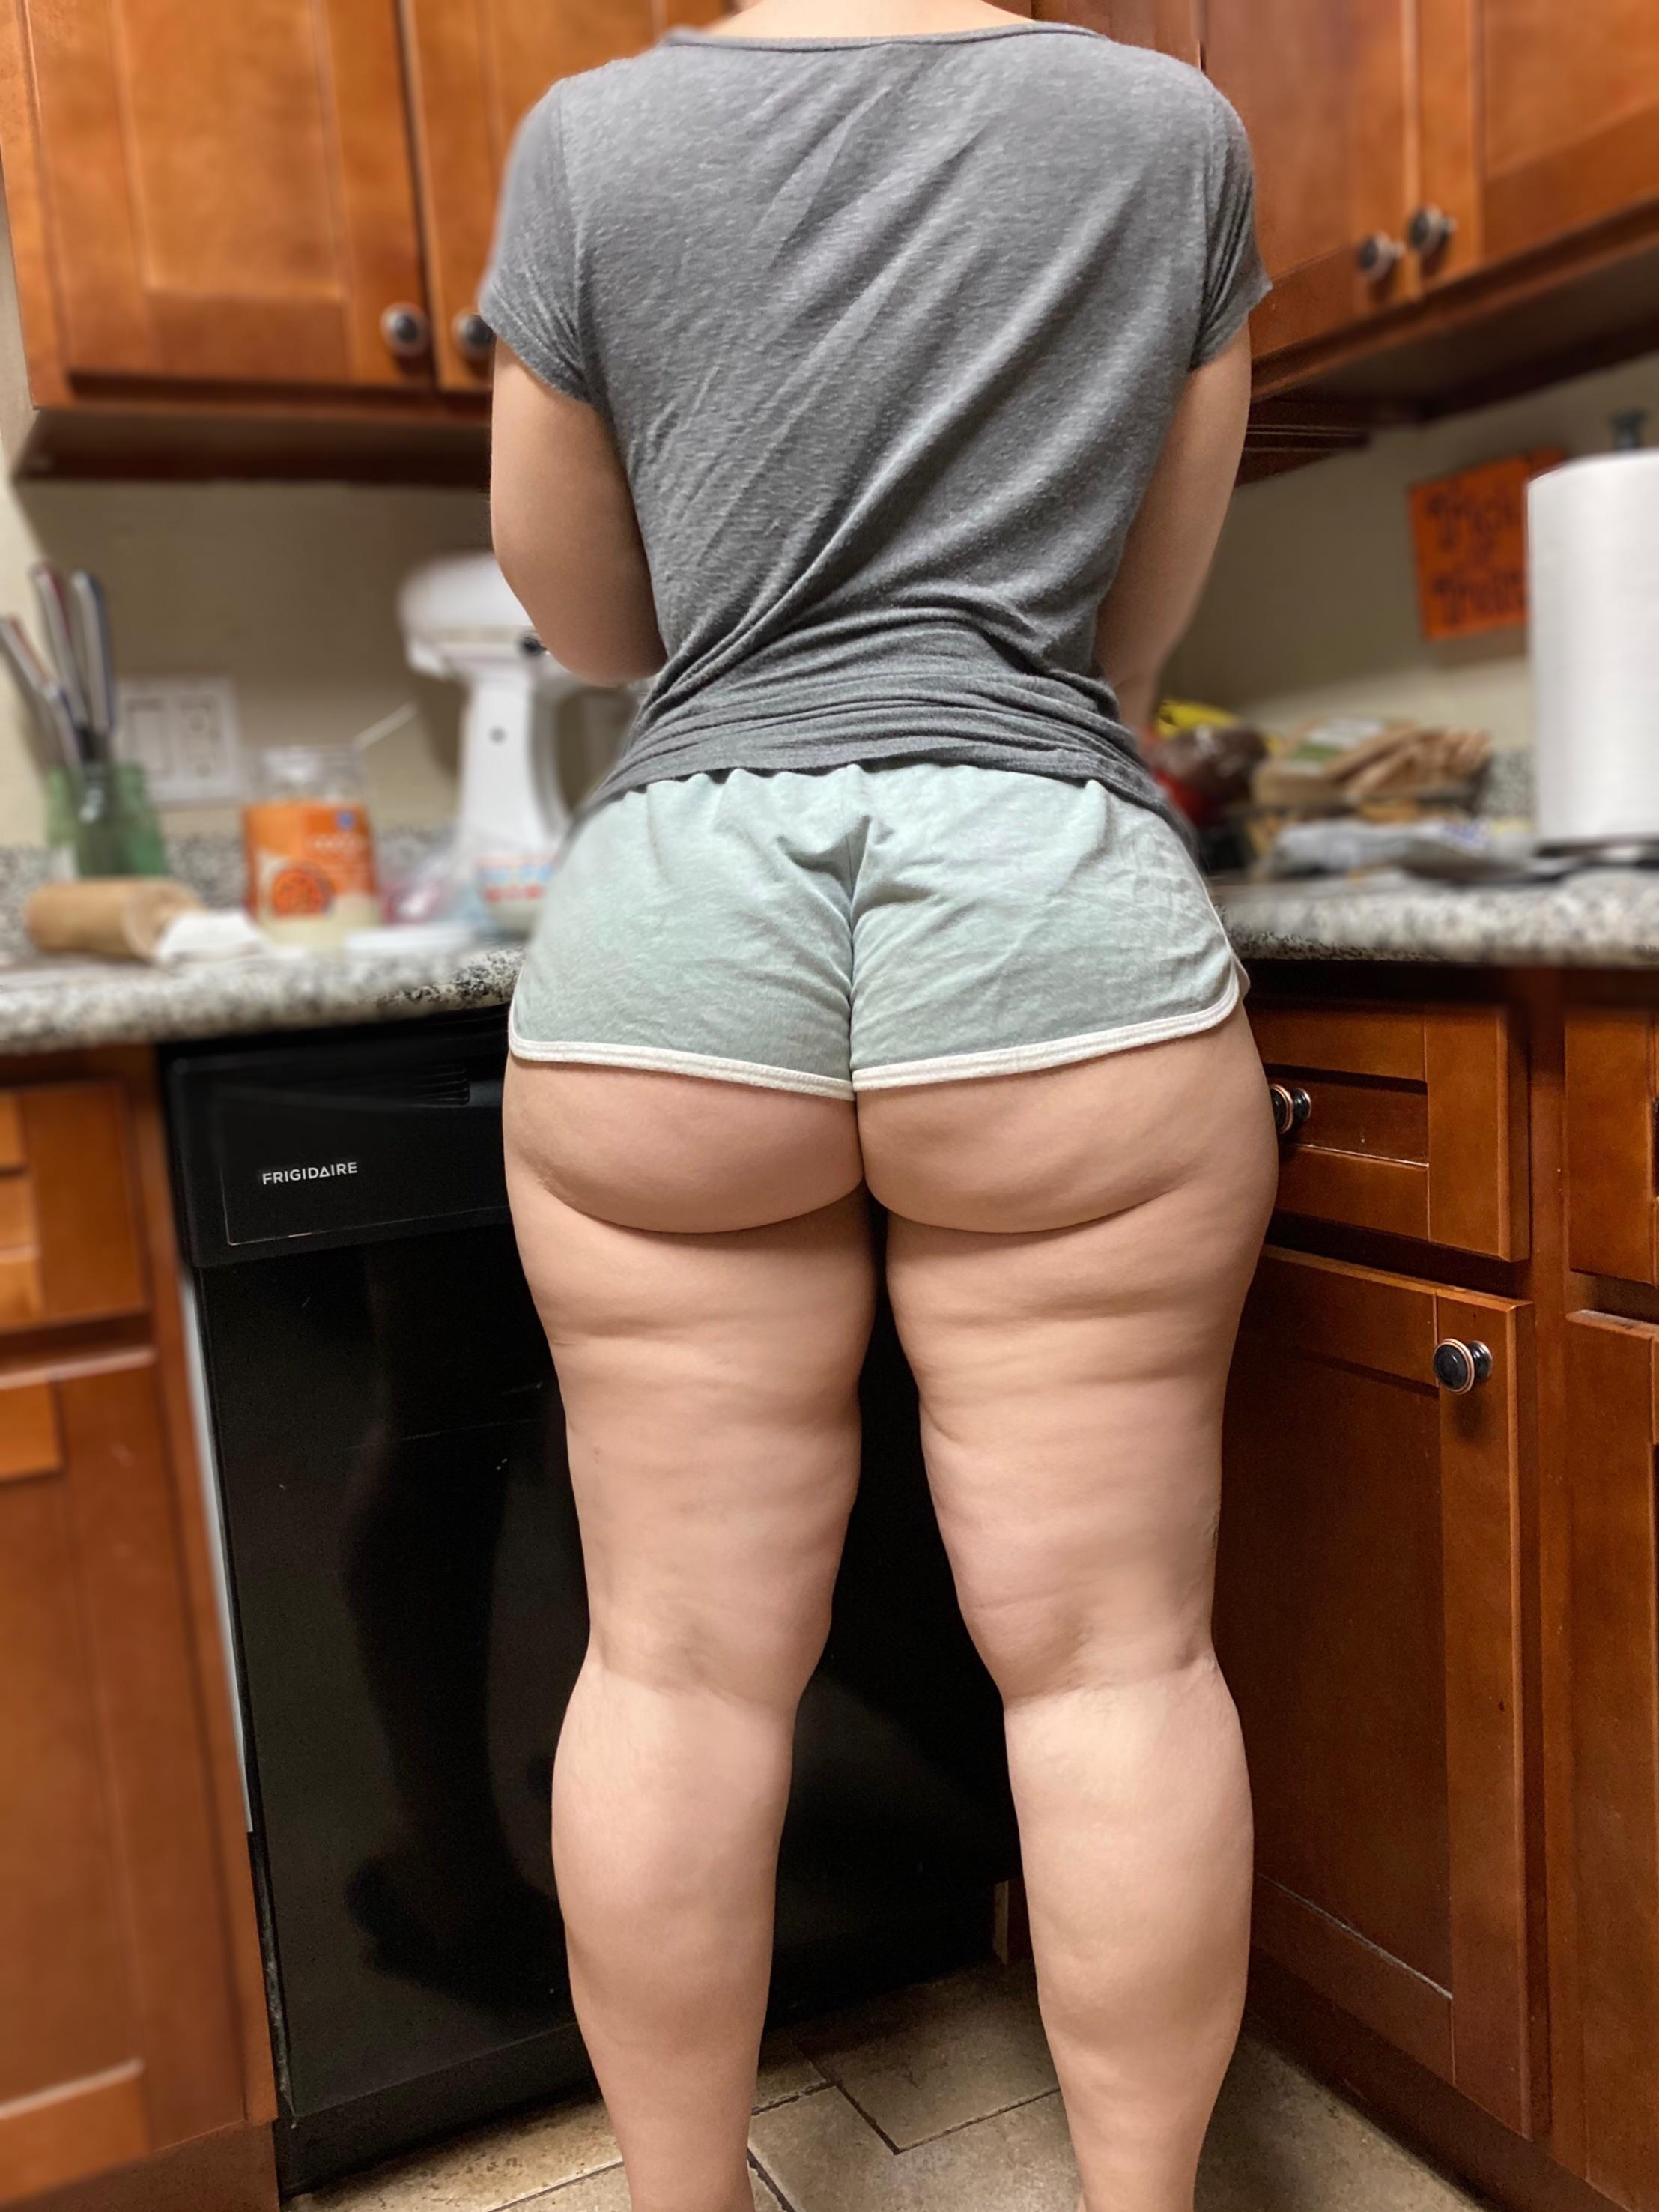 PAWG Buns for breakfast